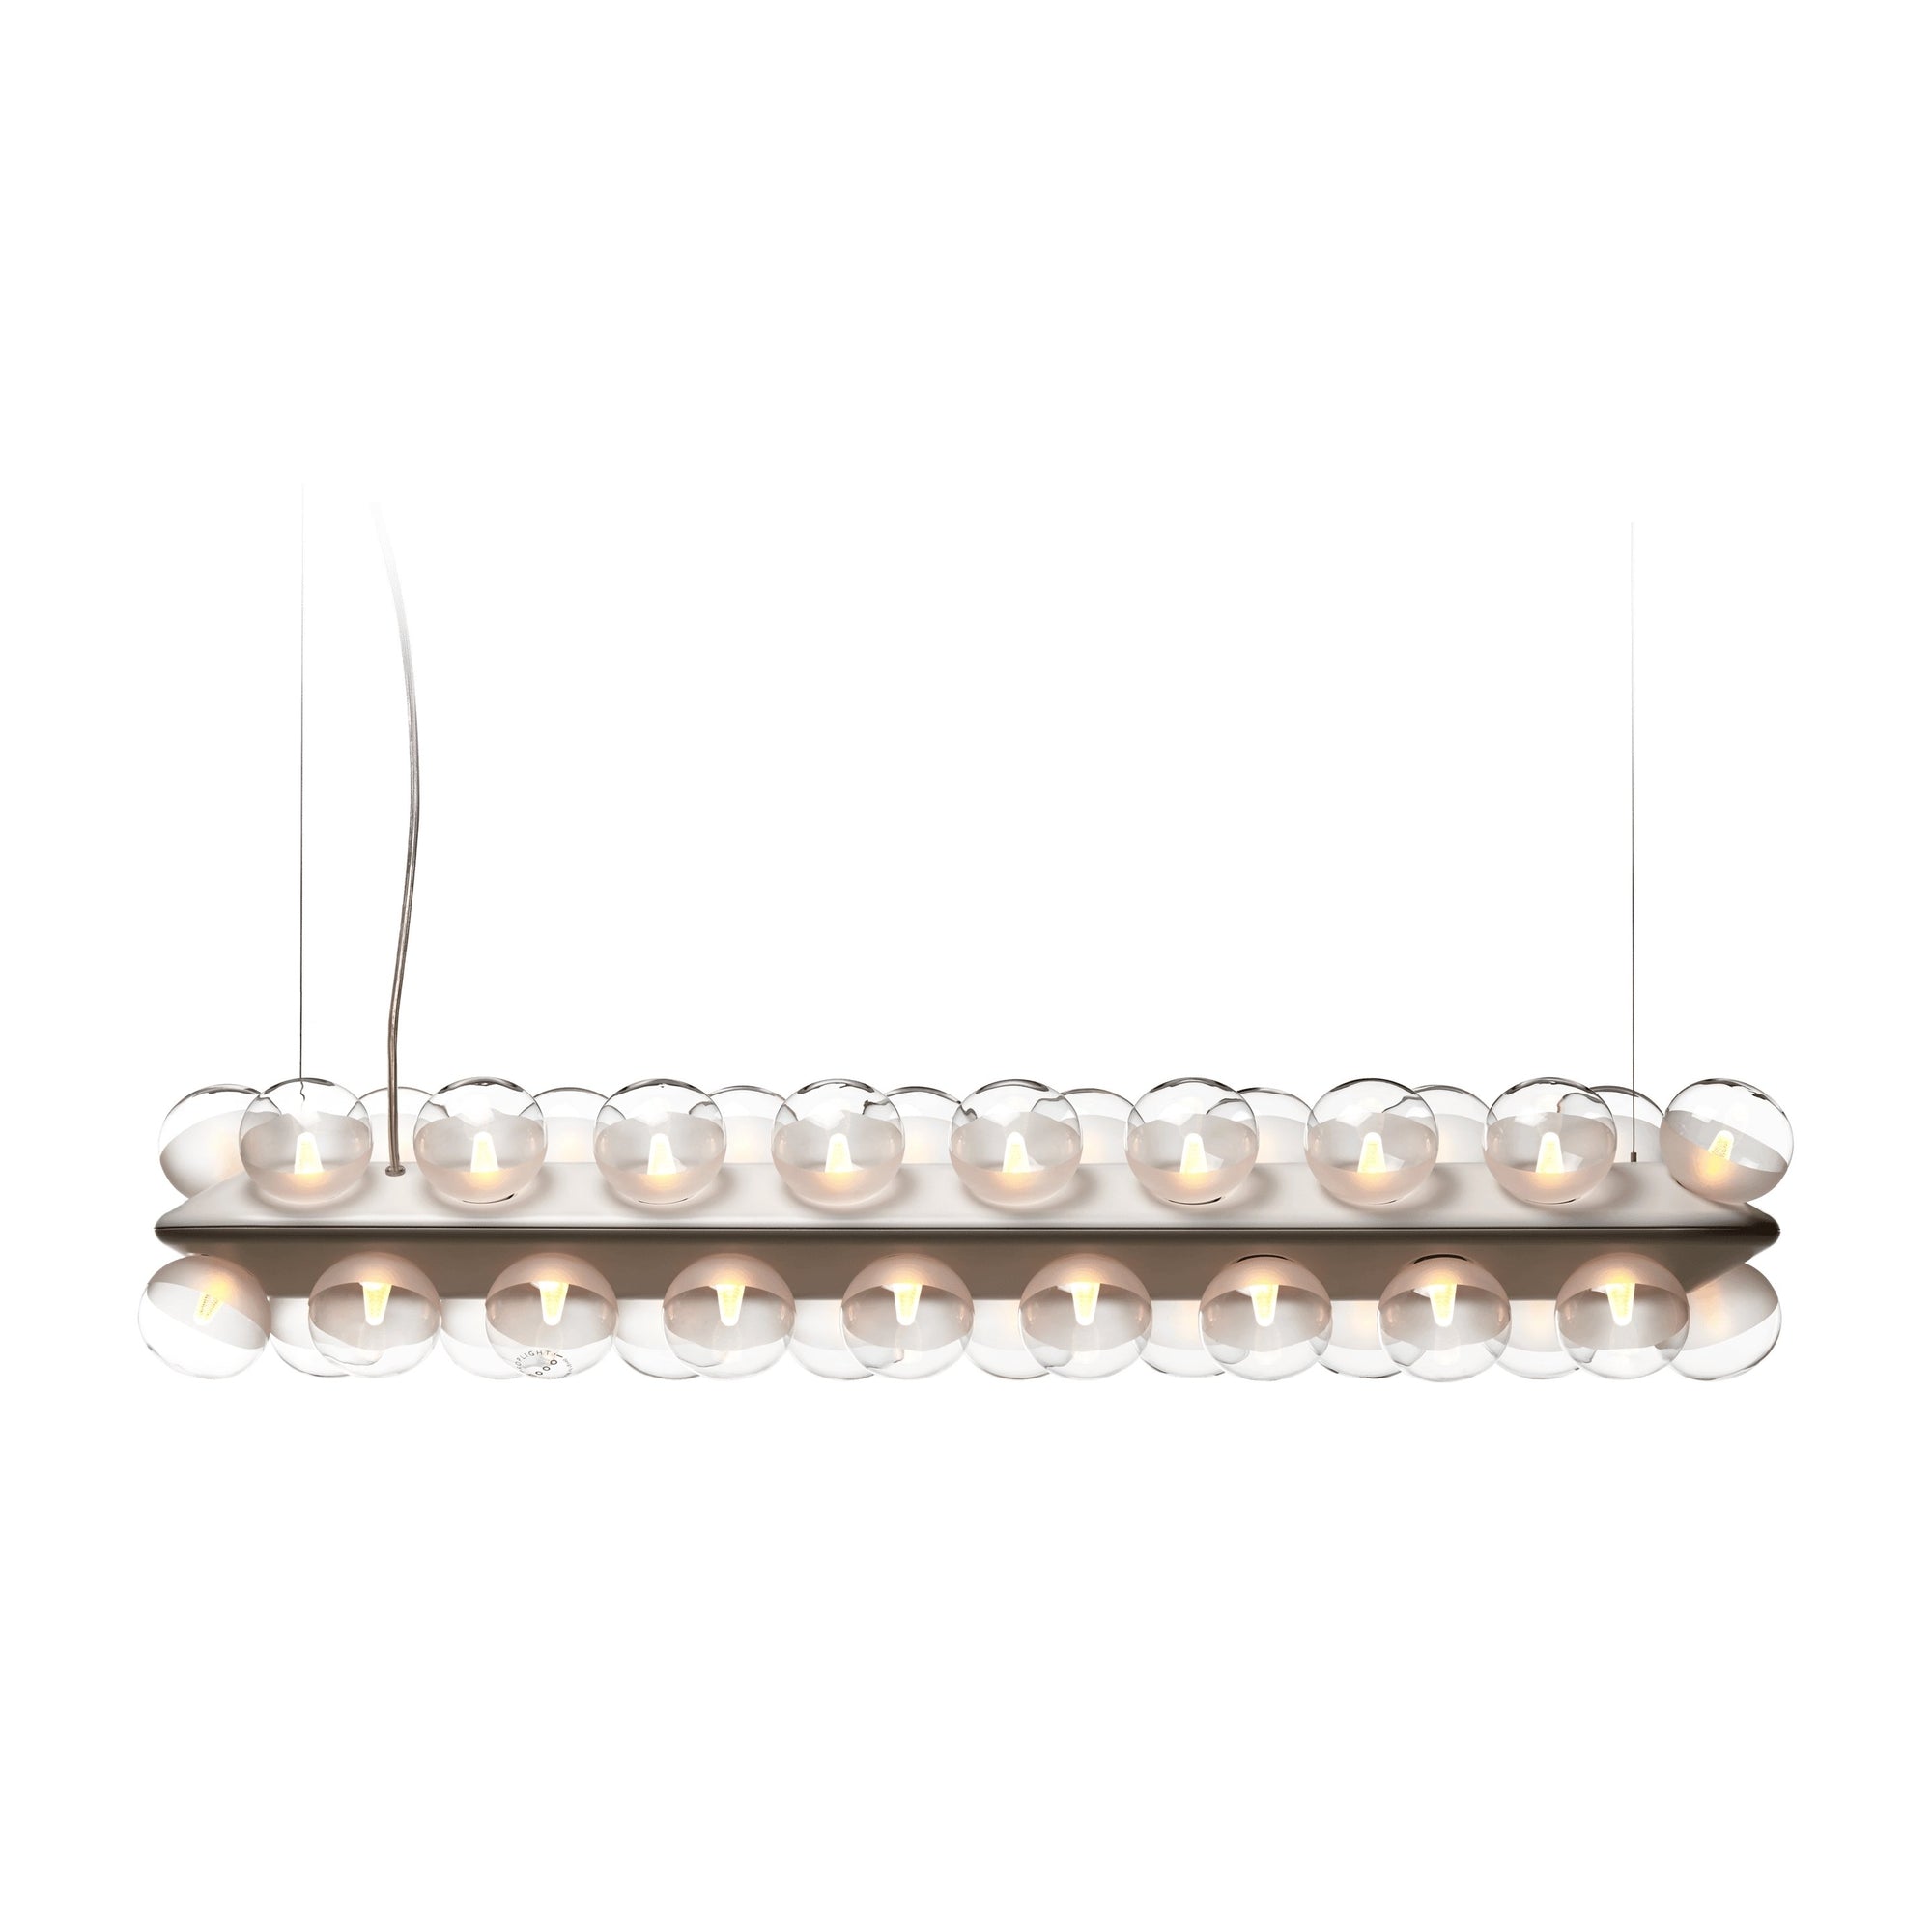 Prop Light Suspended Light - Curated - Lighting - Moooi